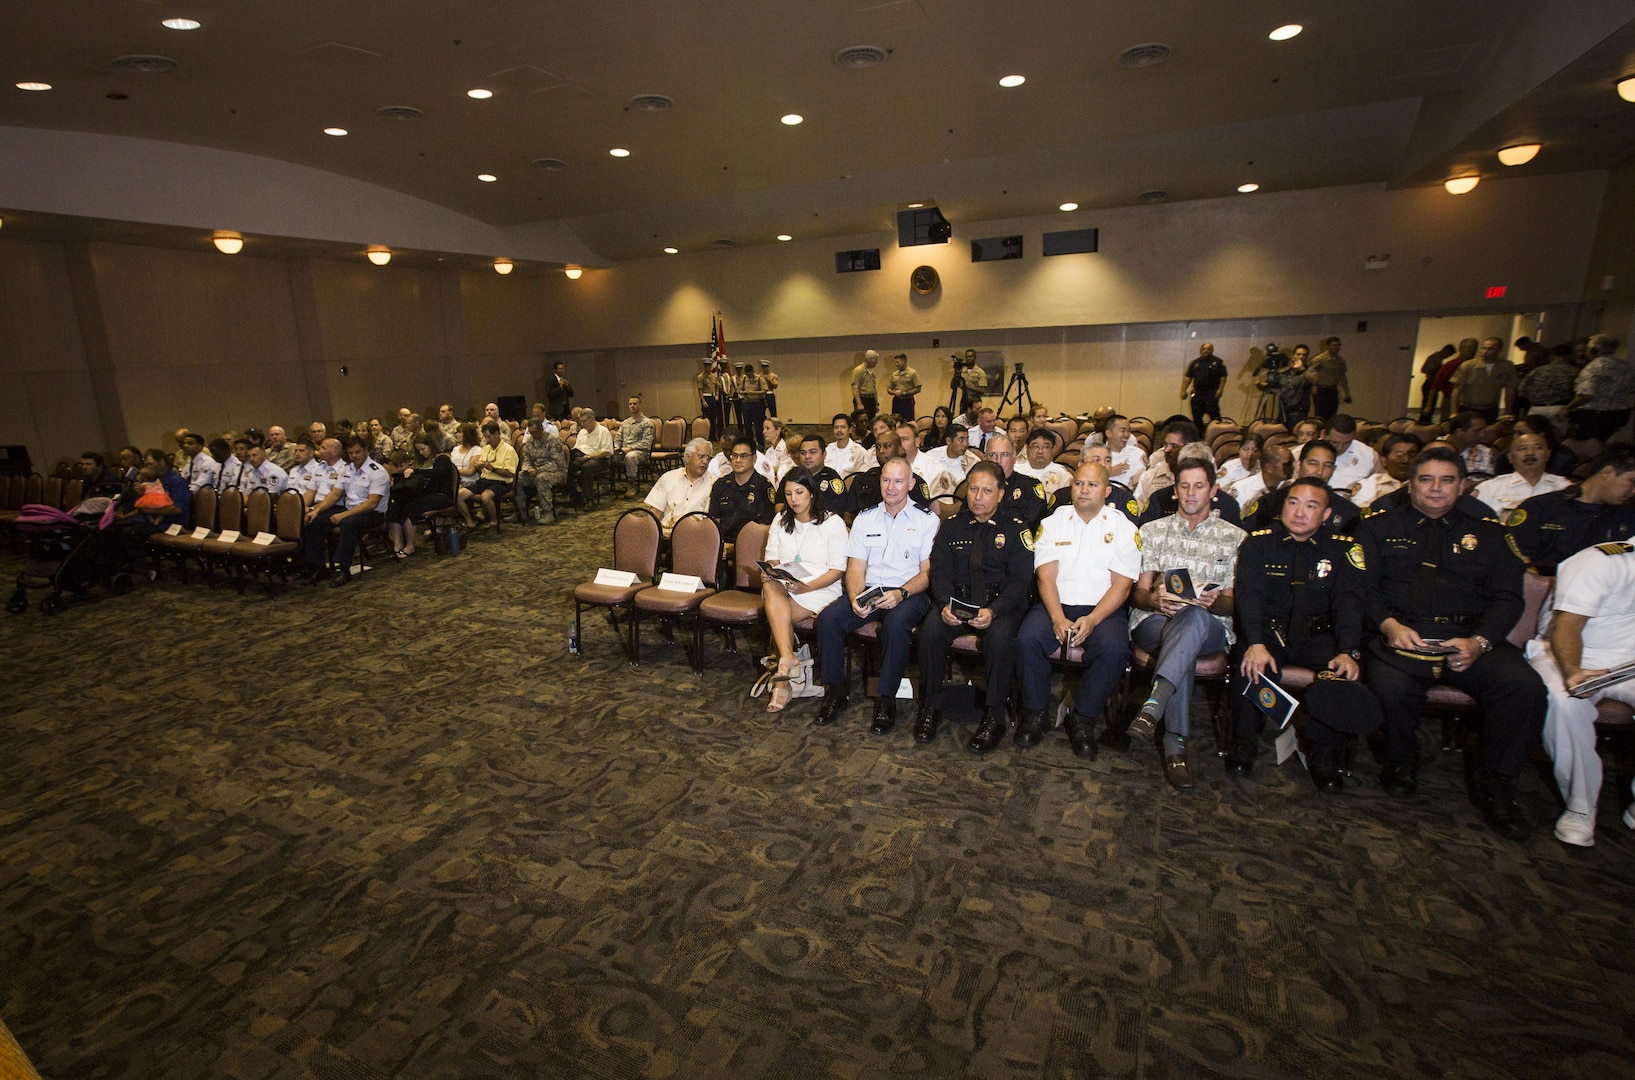 Military and civilian personnel take their seats before the First Responder Recognition Ceremony begins at the Neal S. Blaisdell Center, in Honolulu, Dec. 18, 2015. The first responders aided in the rescue and treatment of the crew and passengers of a 15th Marine Expeditionary Unit MV-22 Osprey tilt-rotor aircraft, which suffered a mishap at Marine Corps Training Area Bellows on May 2015.